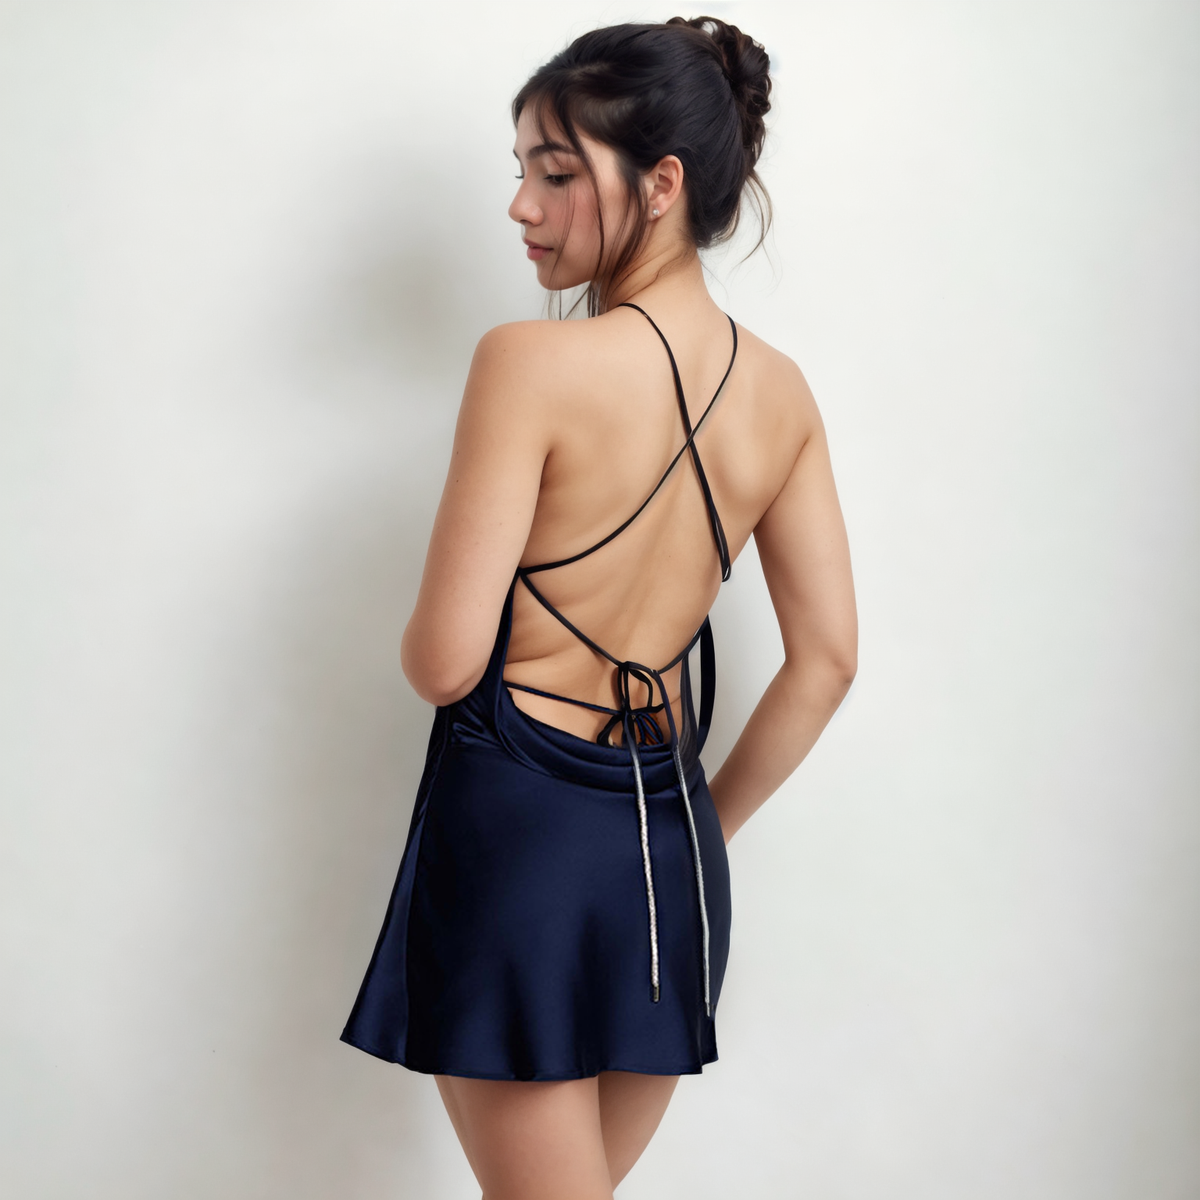 Lustrous Summer: Rhinestone Halter Dress with Sexy Backless Lace-Up Detail - StylinArts